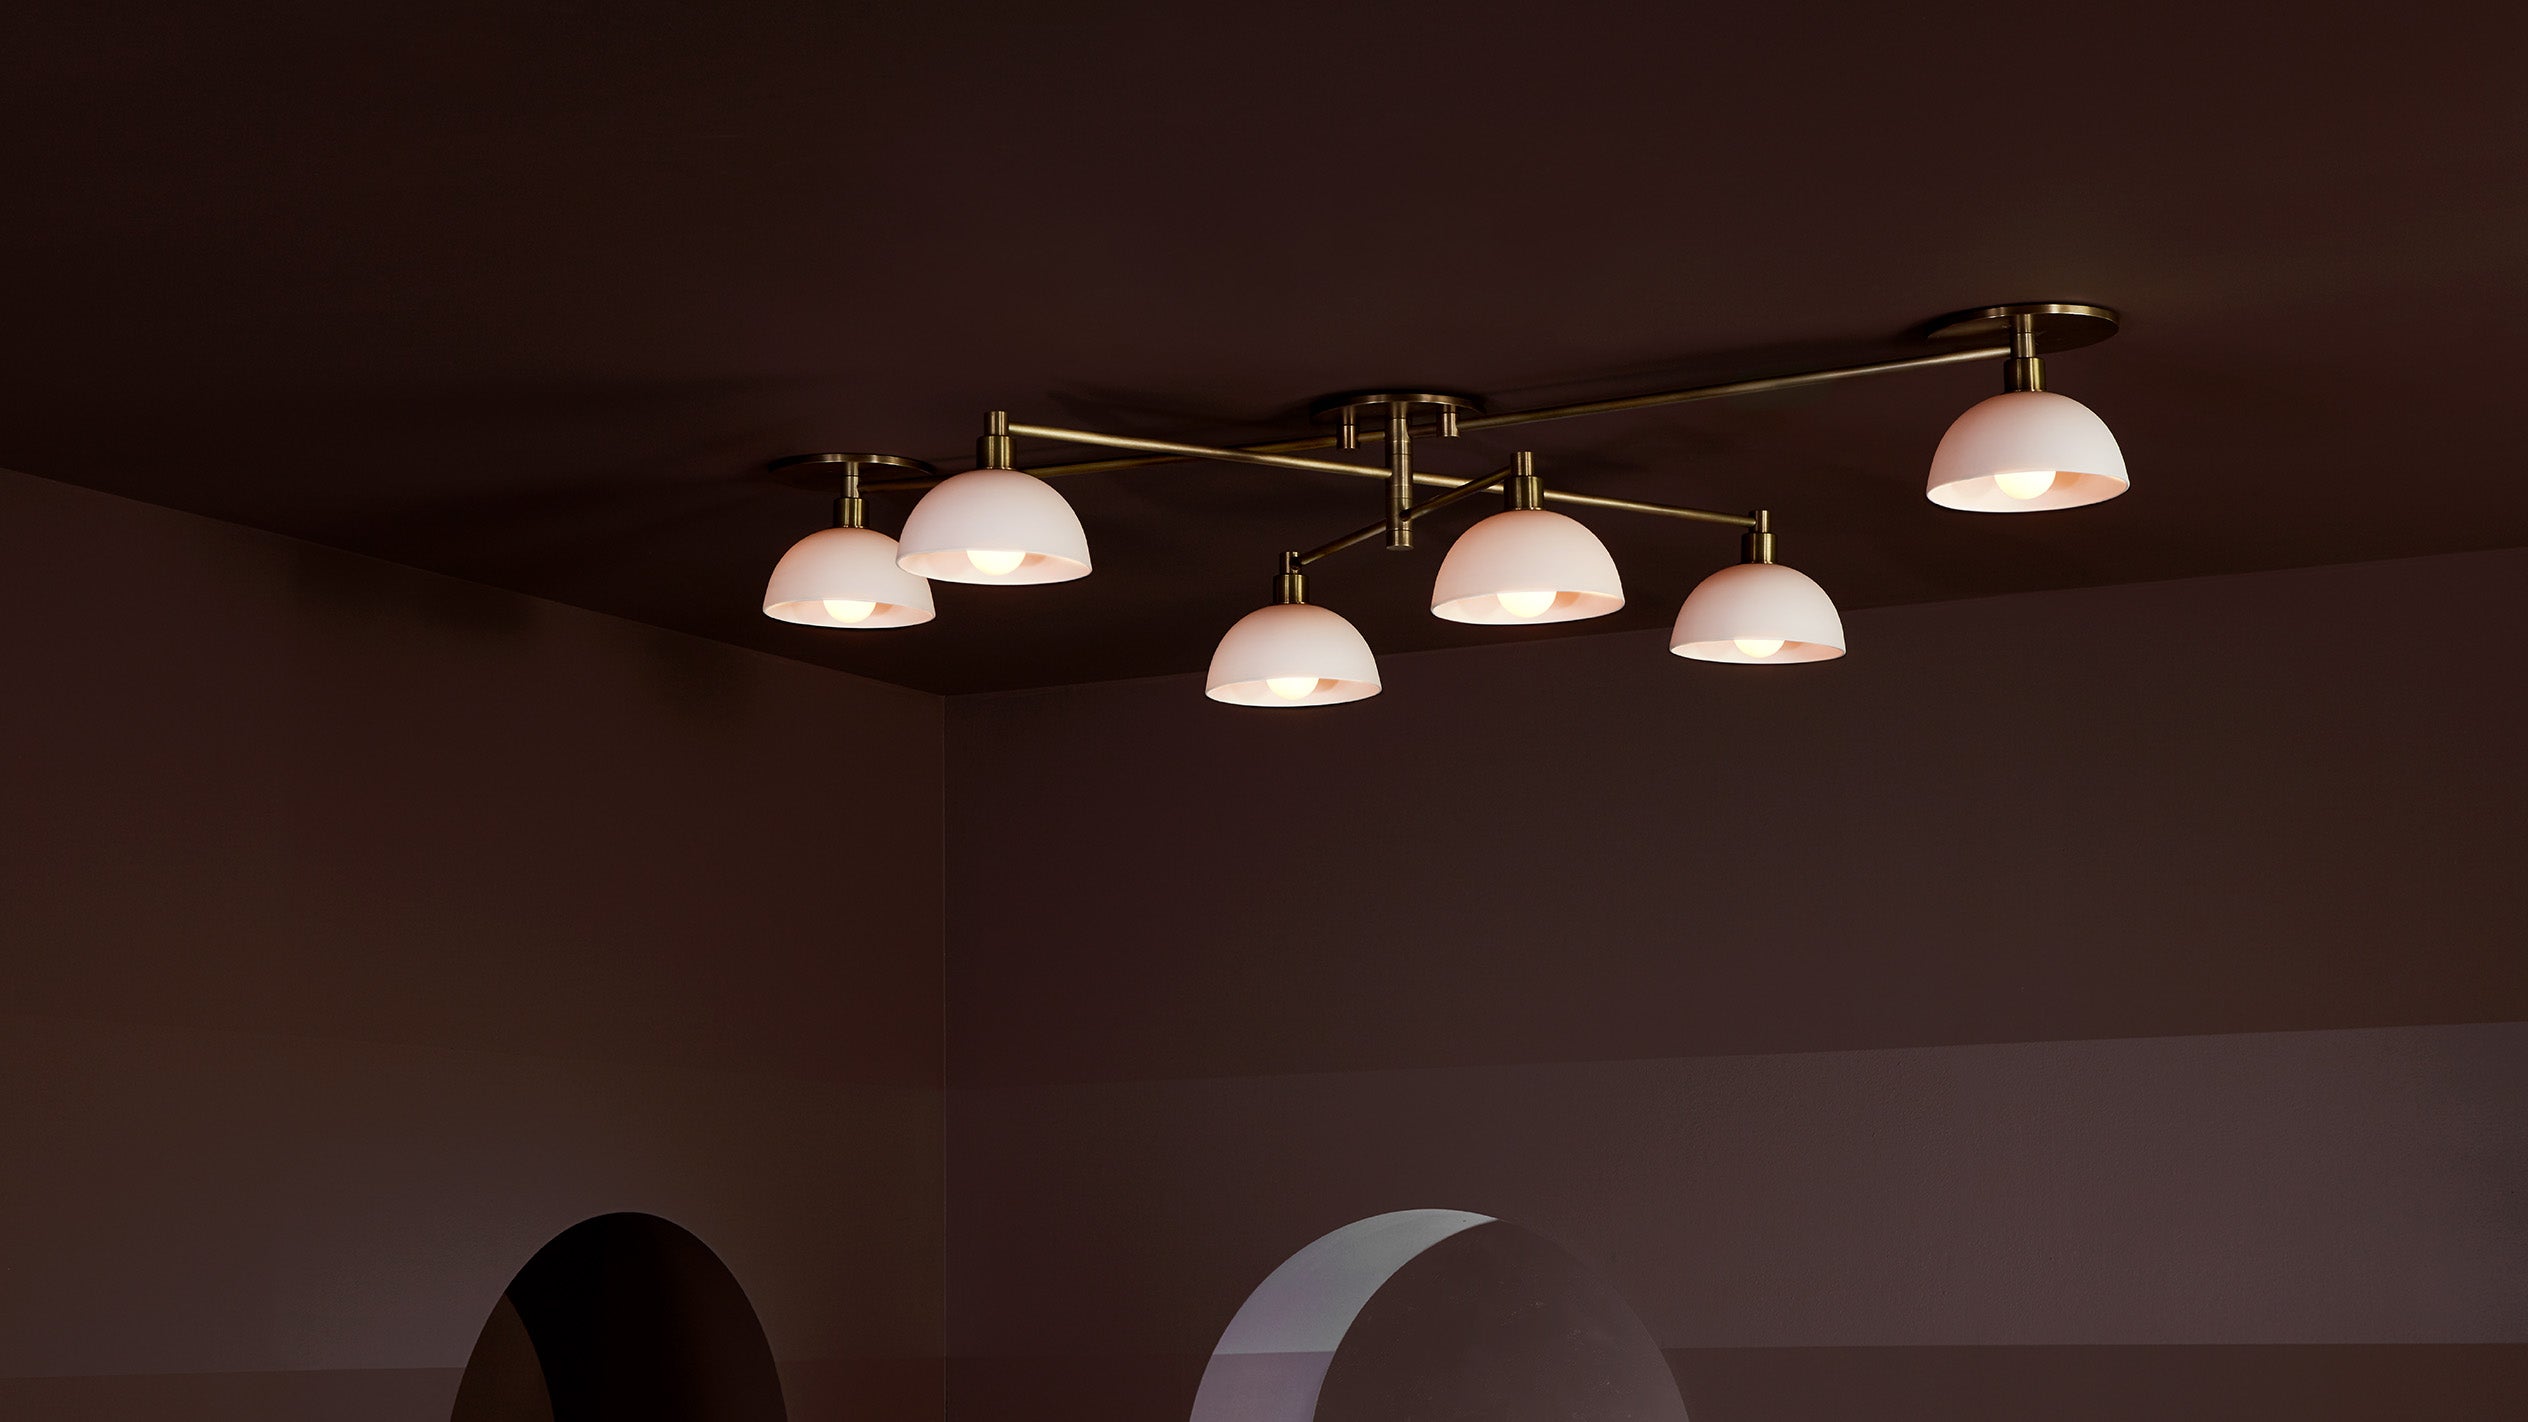 An illuminated TRAPEZE : 6 surface light mounted to a ceiling. 